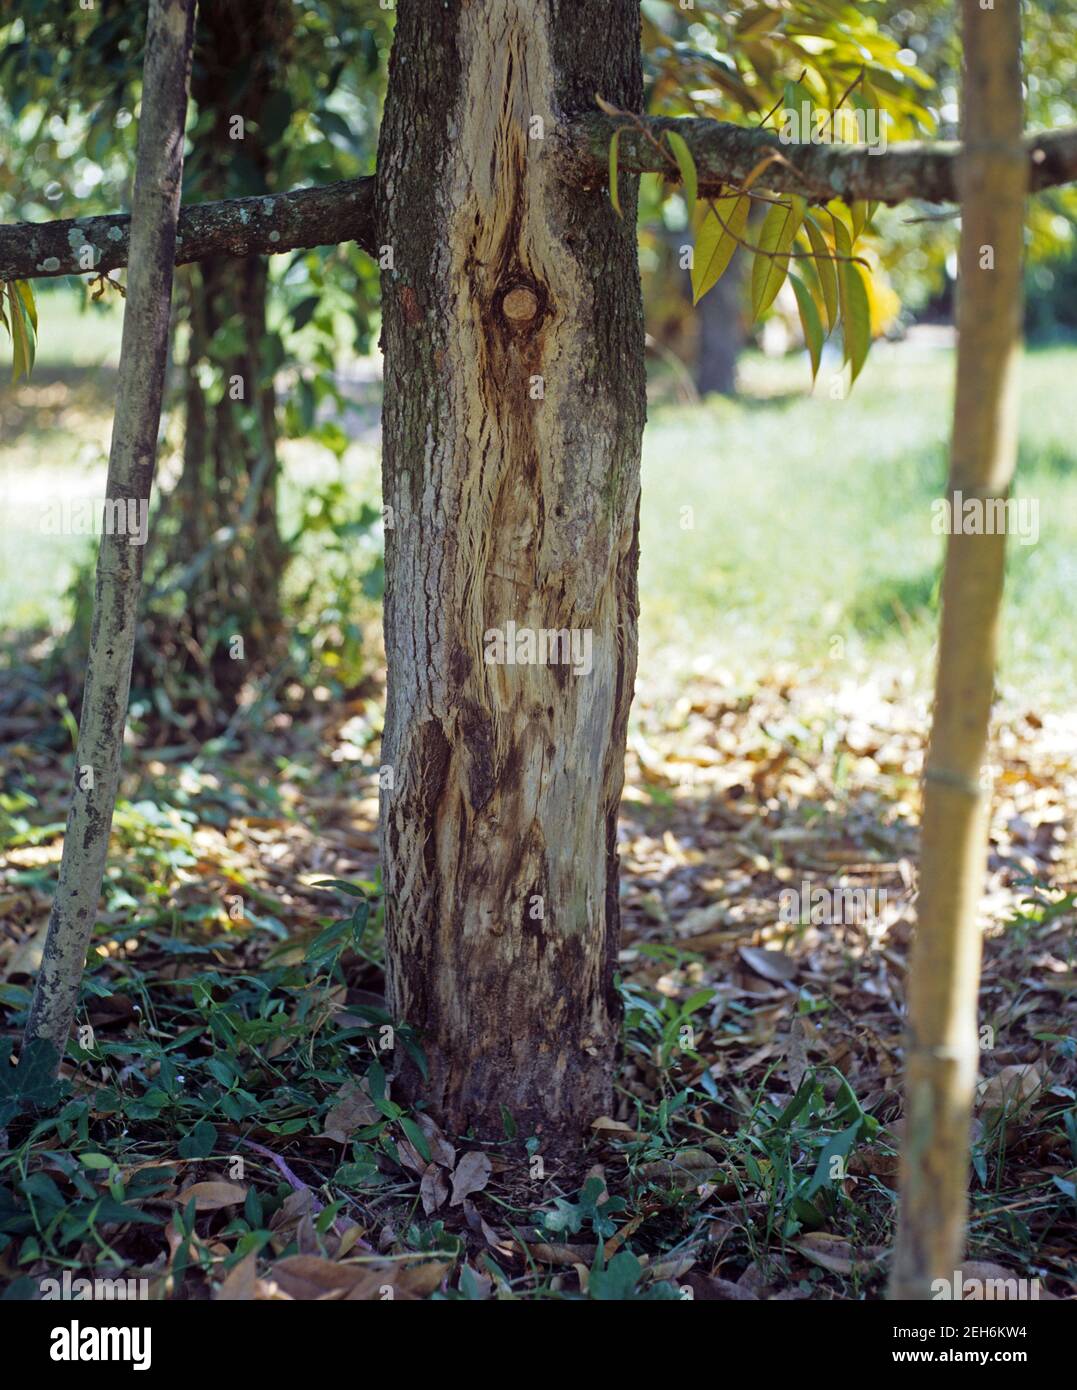 Root rot (Phytophthora cinnamoni) damage to to the base of the trunk of a durian tree in a plantation, Thailand Stock Photo